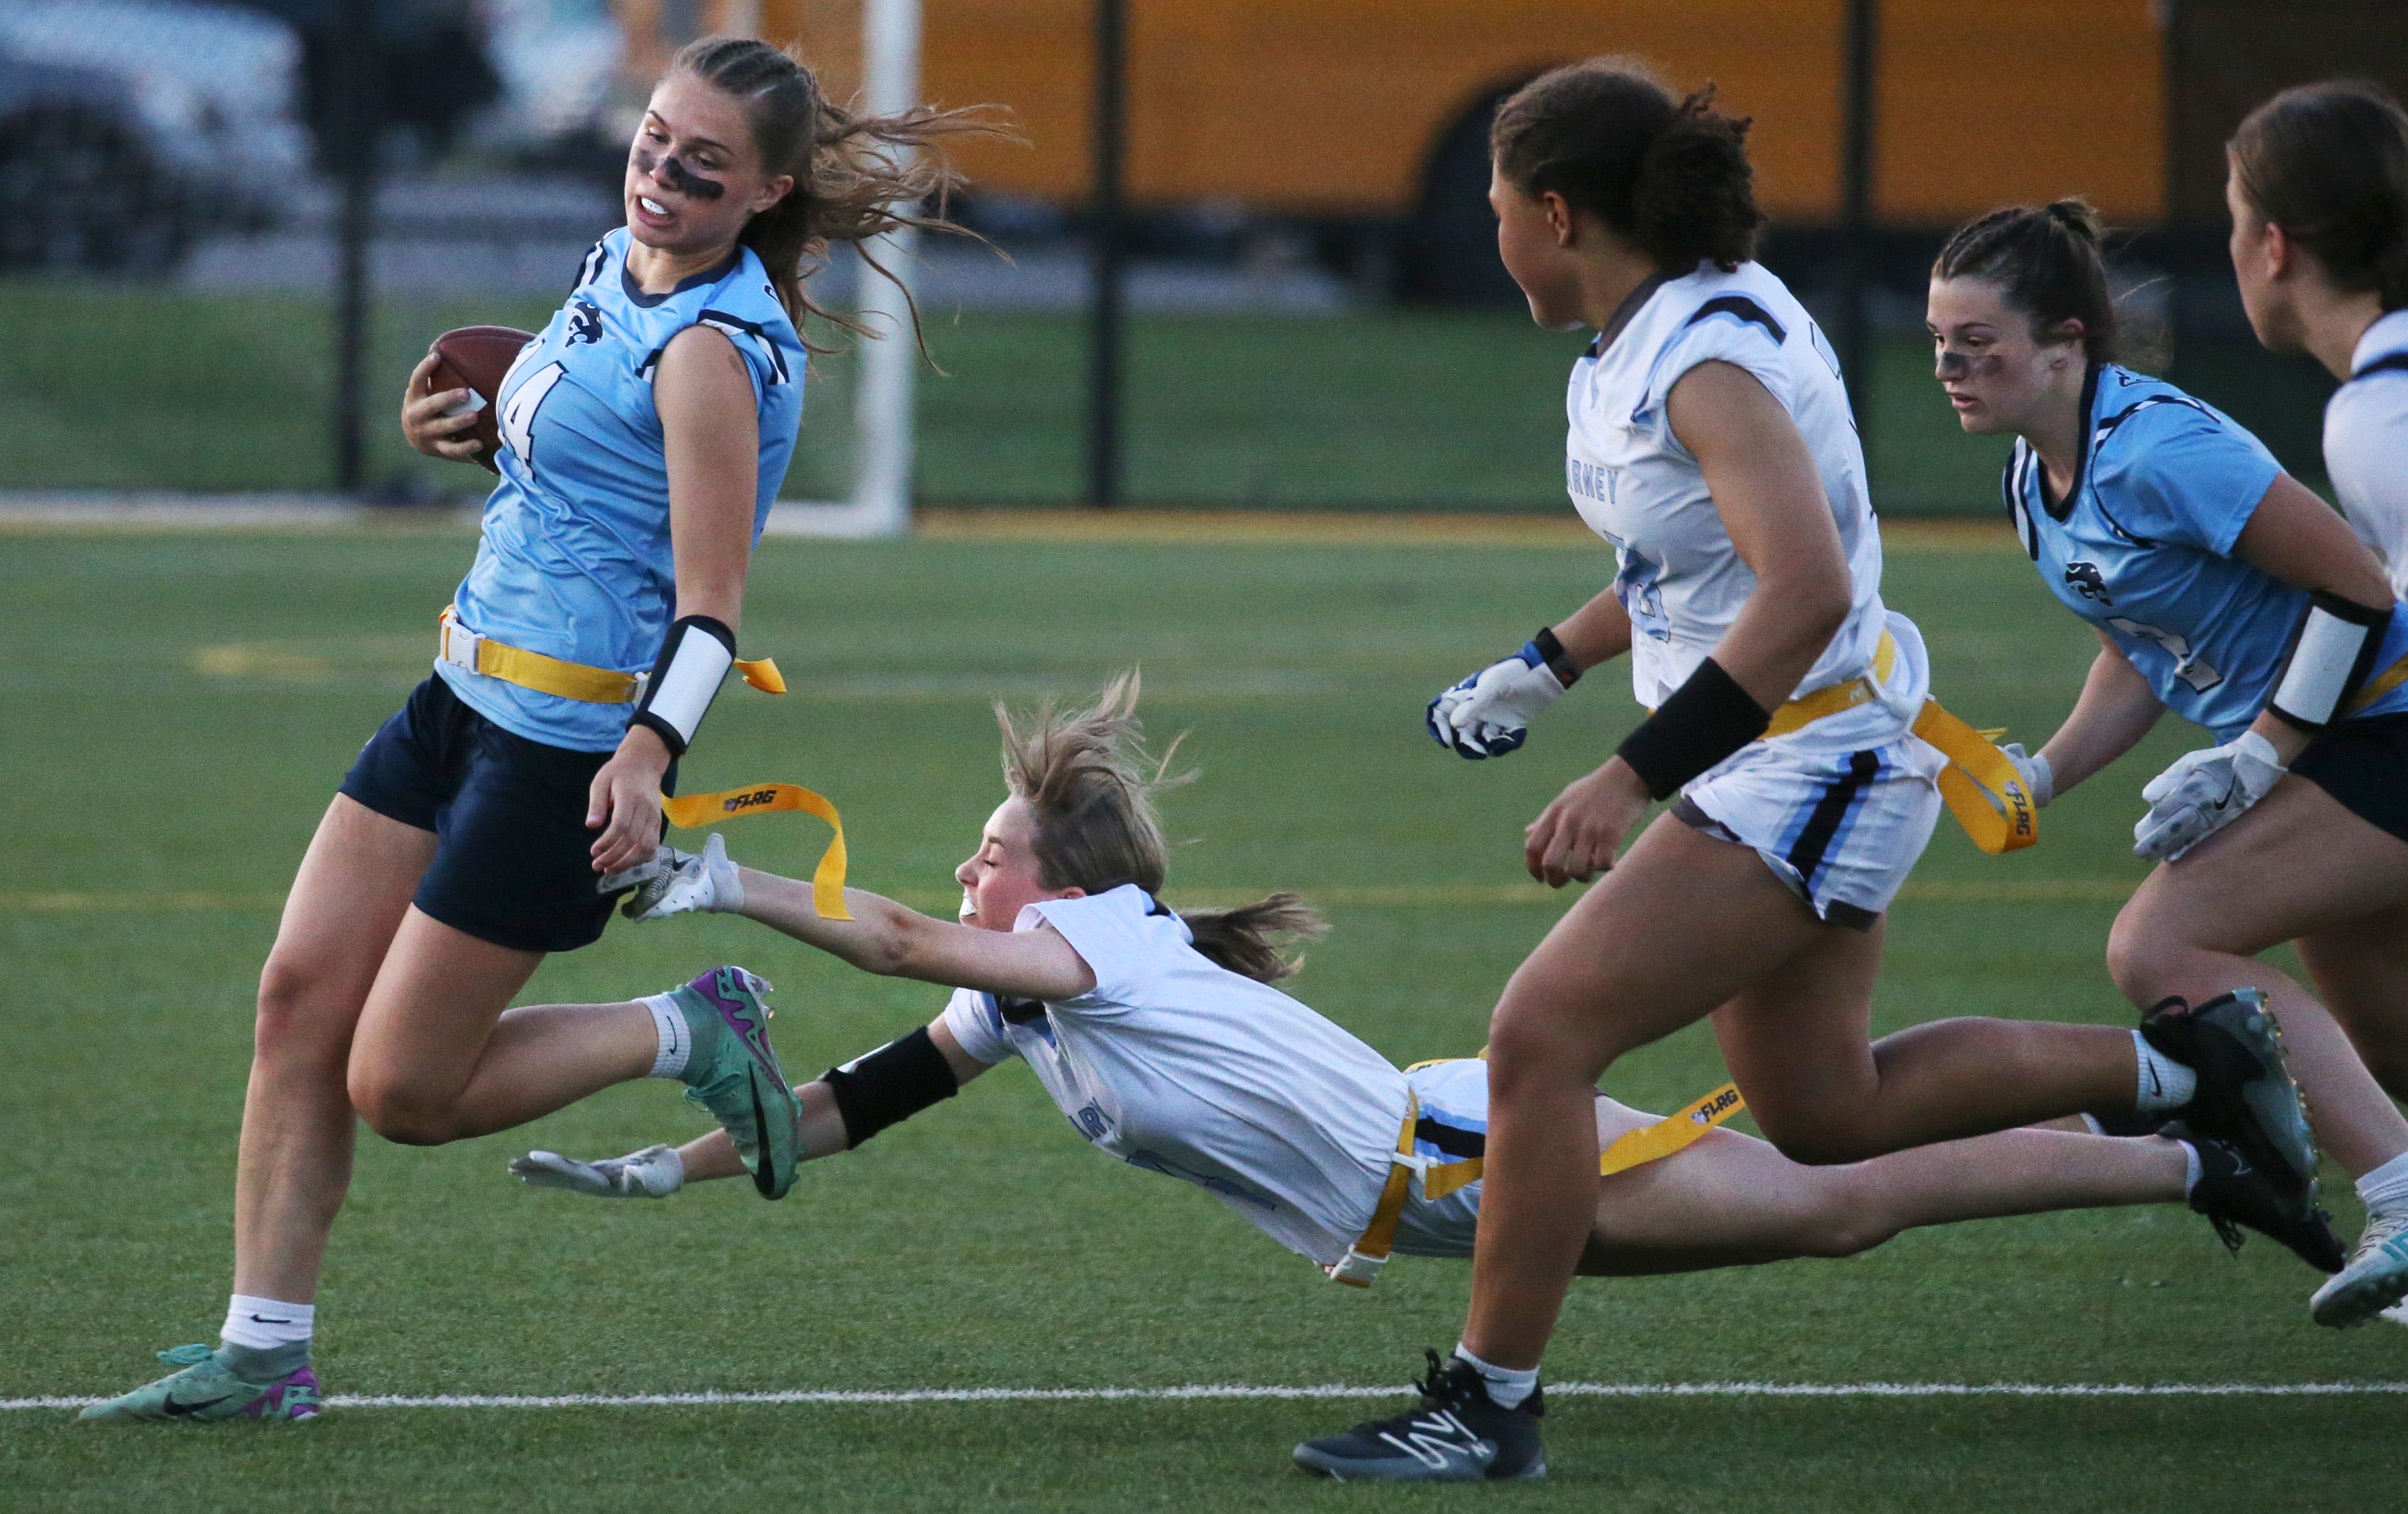 Bishop Kearney remains undefeated with Section V flag football title: How they did it